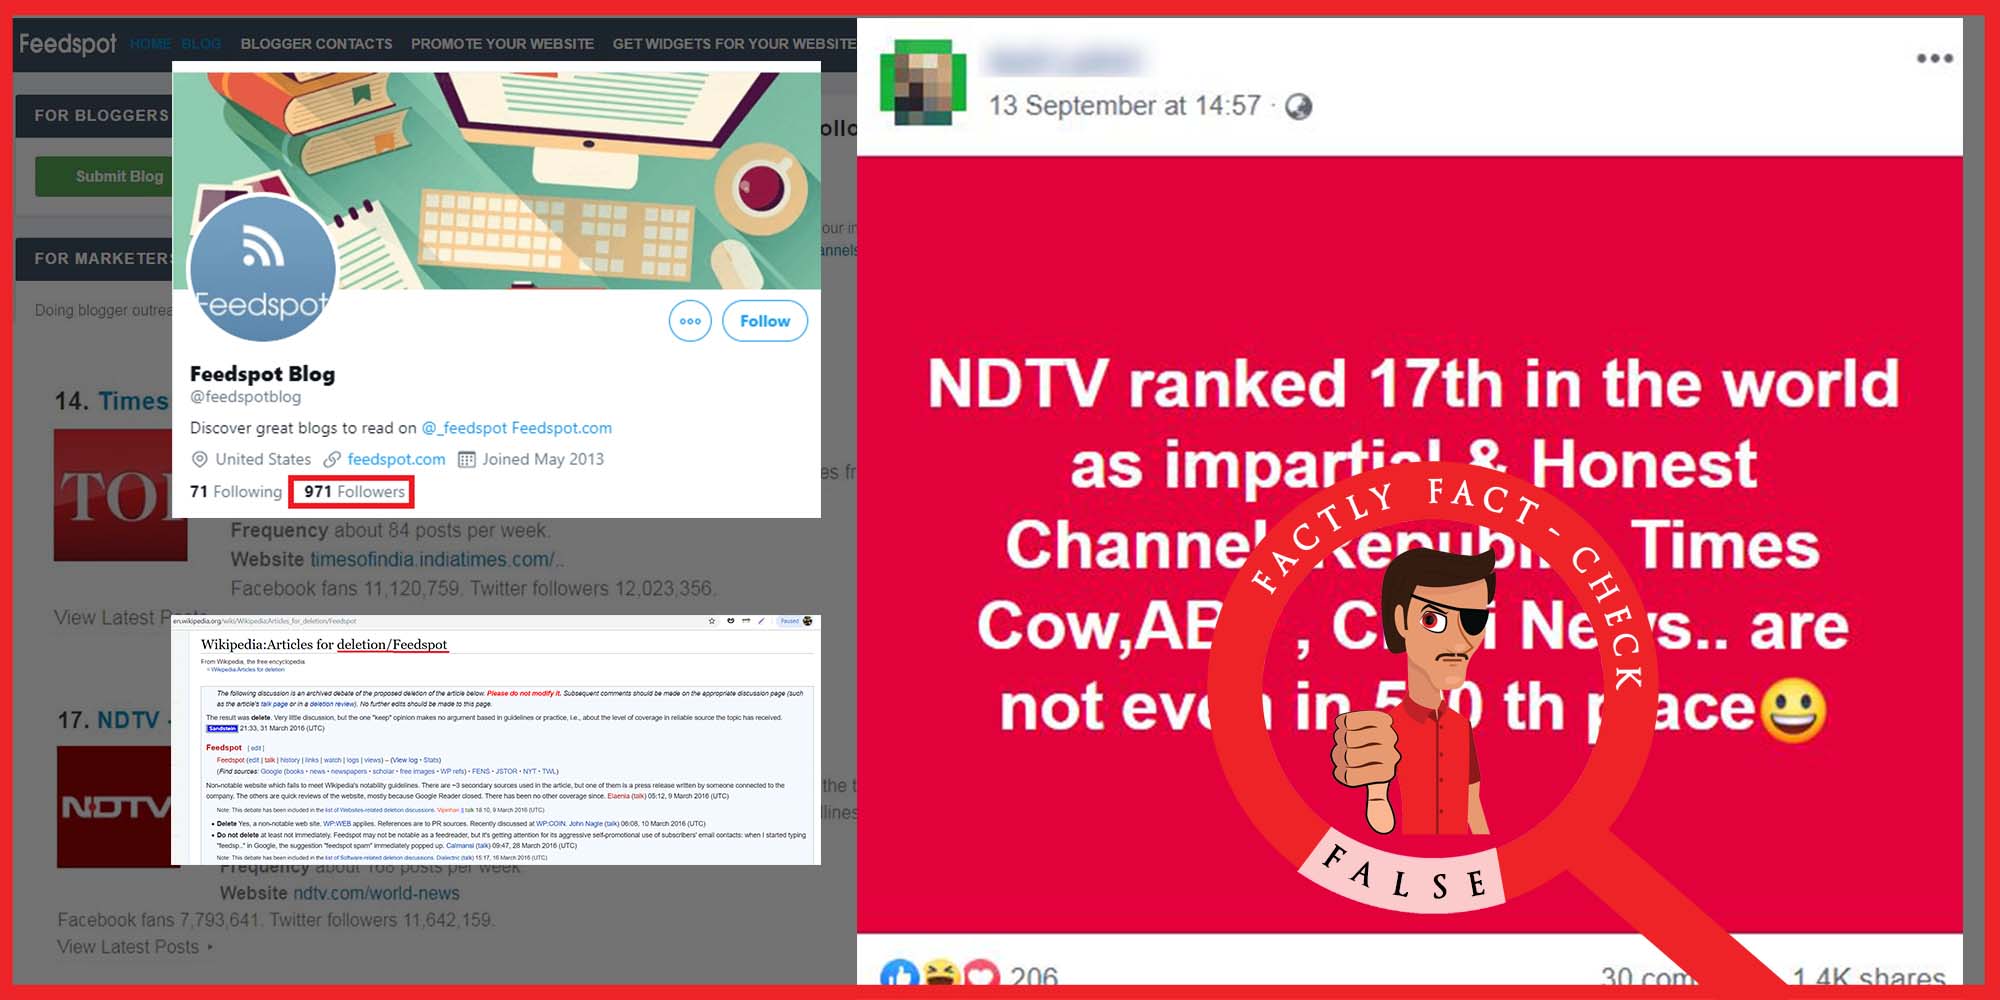 No, NDTV has not been ranked as the top 17th impartial and honest news website in the world - FACTLY